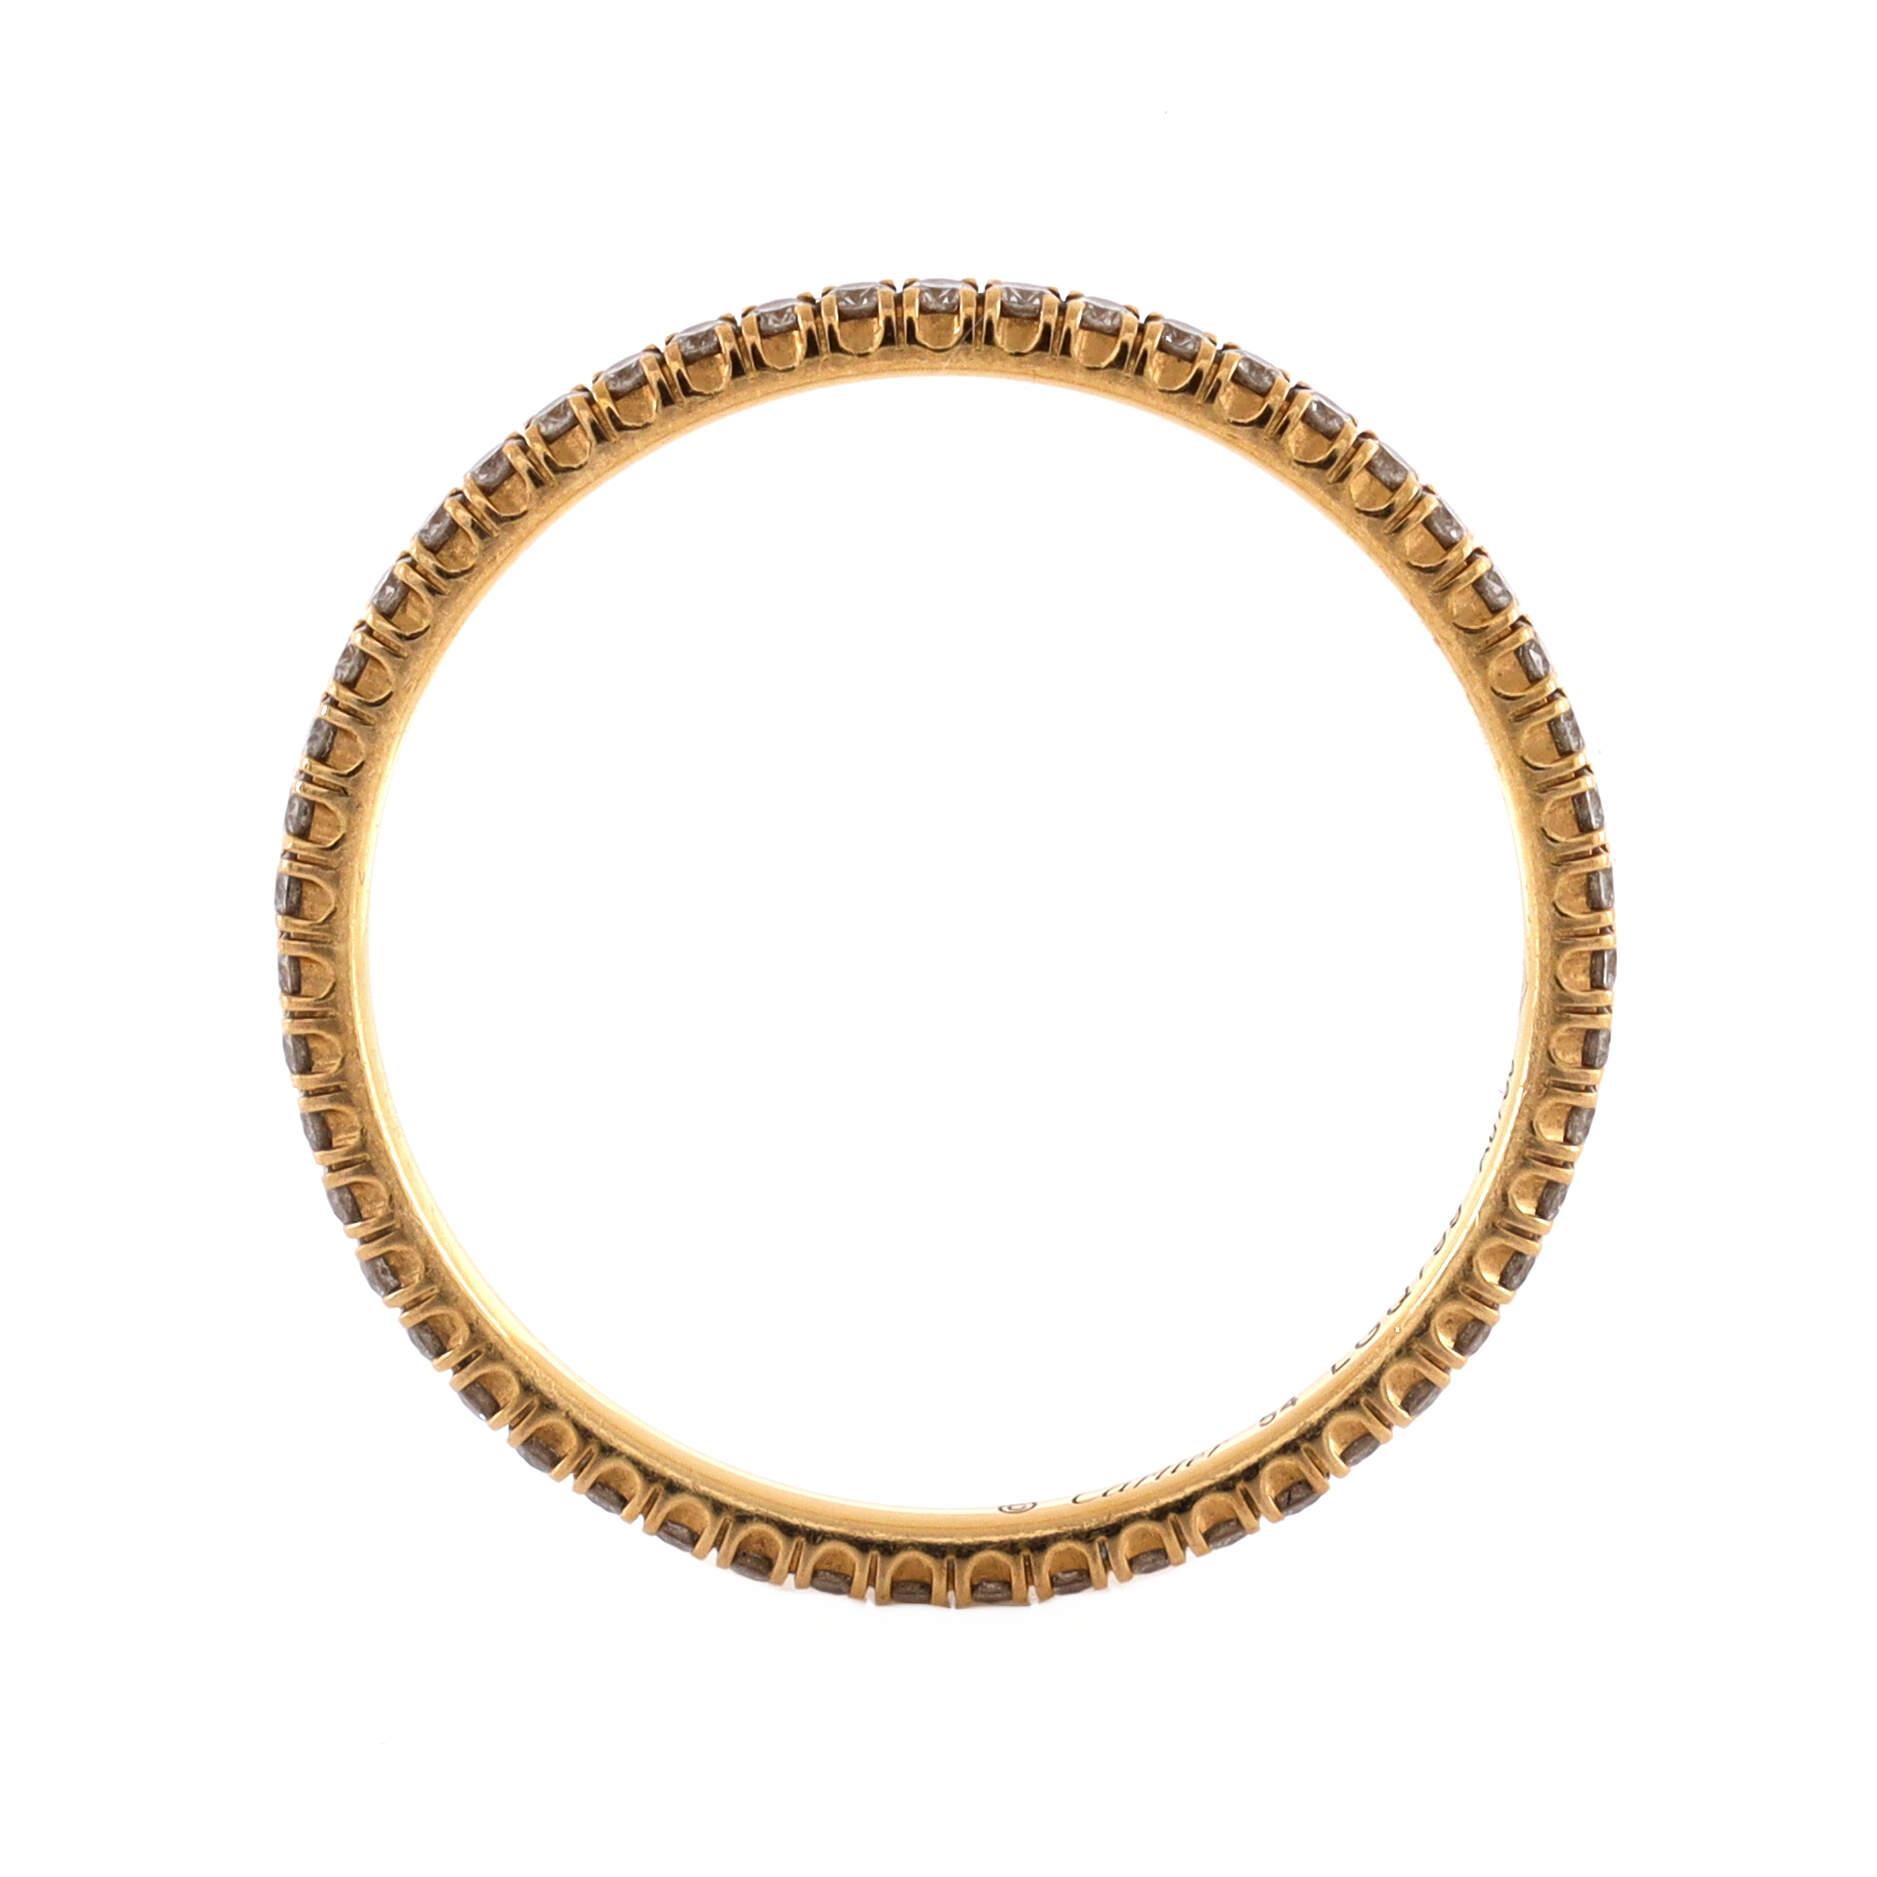 Condition: Great. Minor wear throughout.
Accessories: No Accessories
Measurements: Size: 6.75 - 54, Width: 1.50 mm
Designer: Cartier
Model: Etincelle de Cartier Eternity Wedding Band Ring 18K Yellow Gold and Diamonds 1.5mm
Exterior Color: Yellow